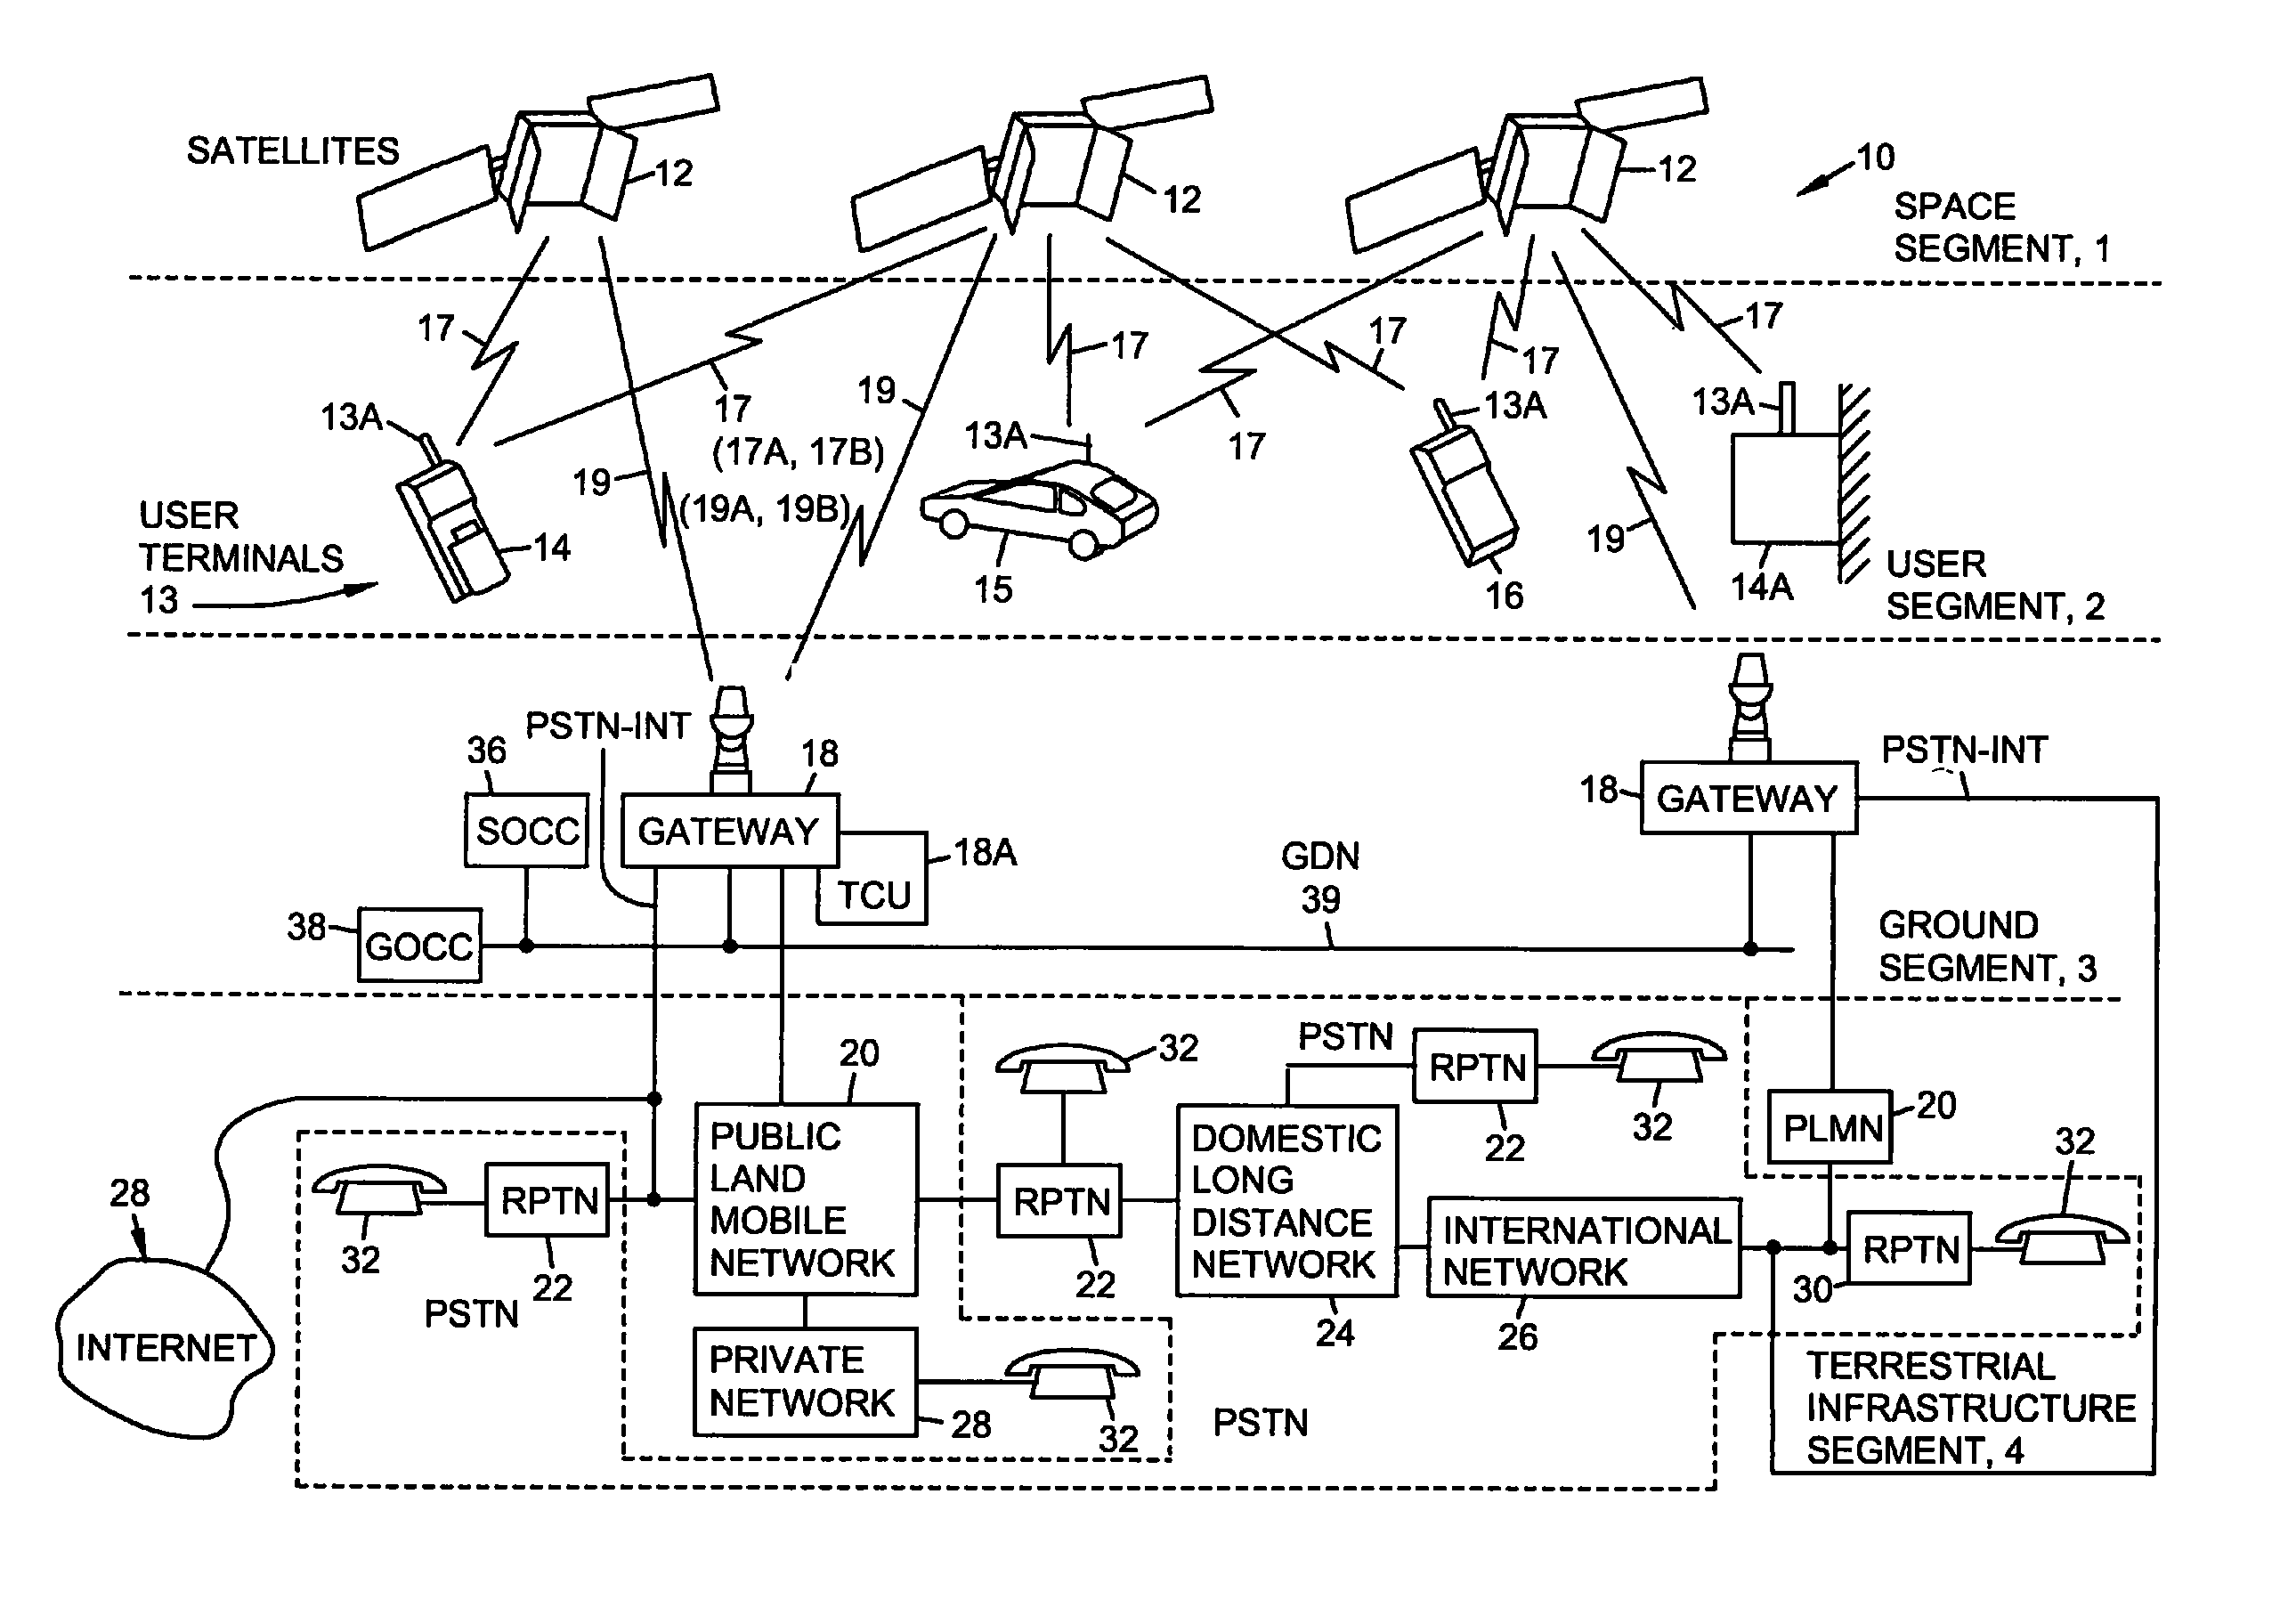 Satellite communication system employing a combination of time division multiplexing and non-orthogonal pseudorandom noise codes and time slots